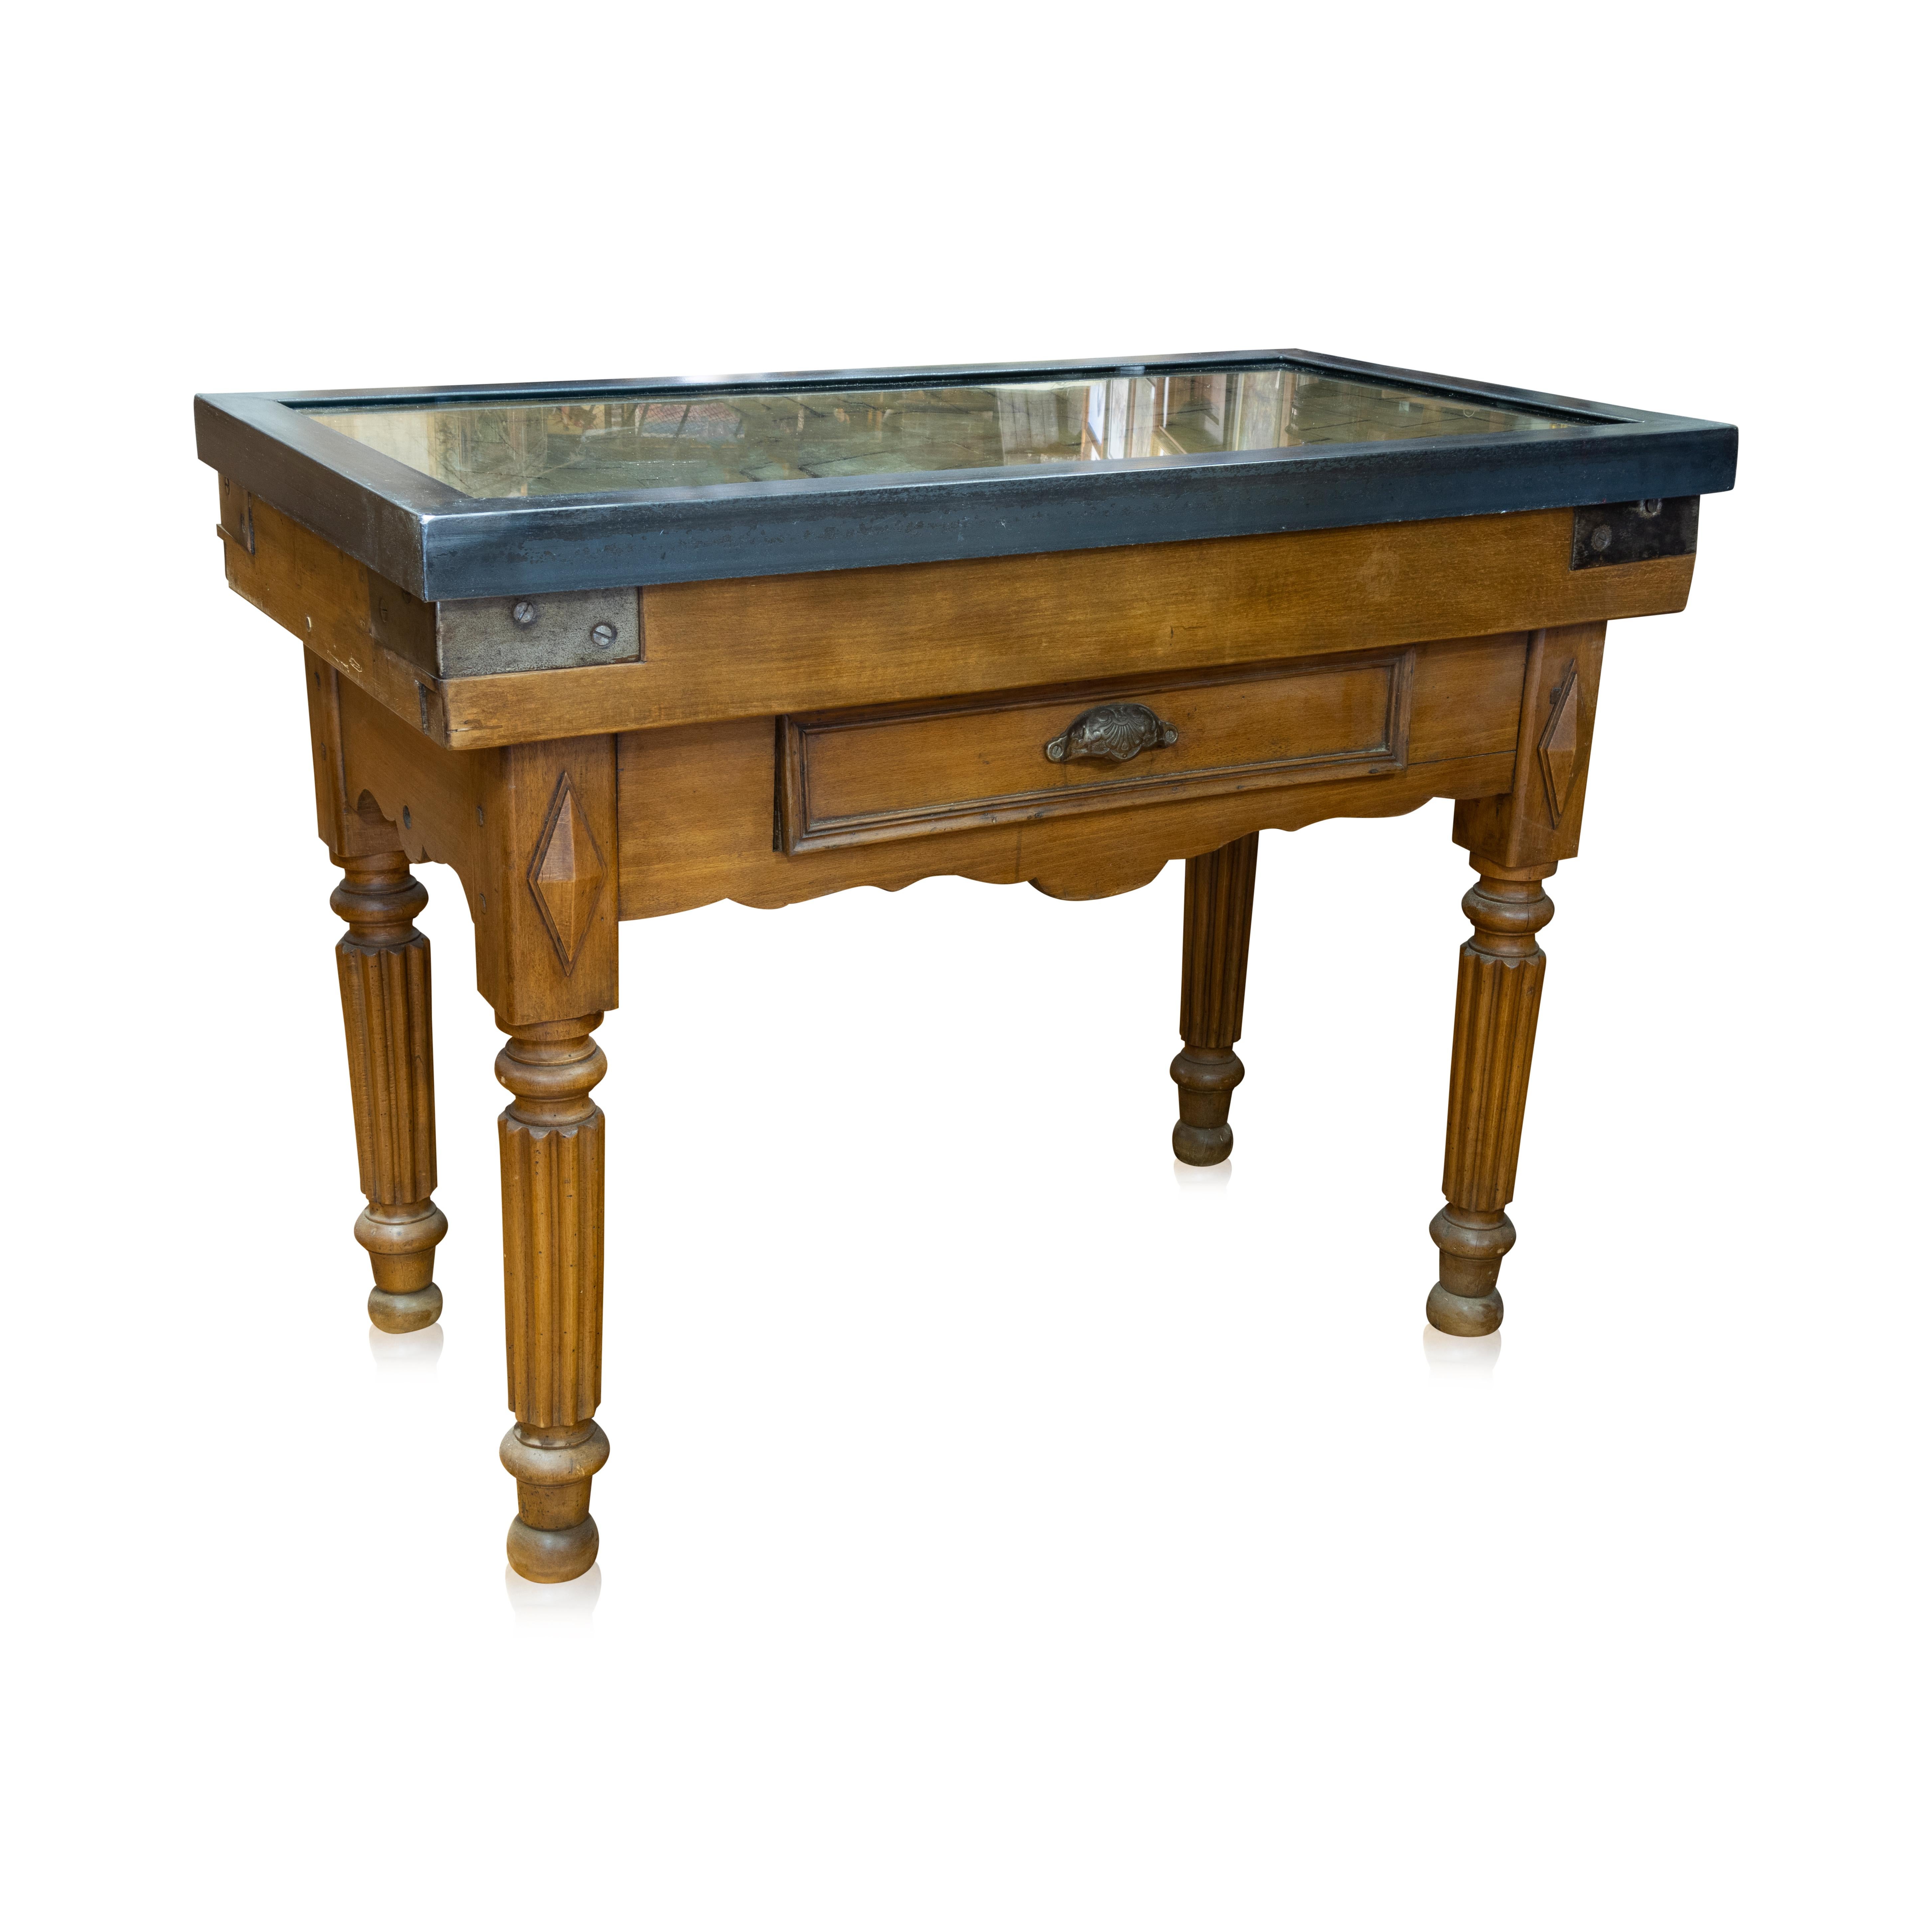 Well patinated French provincial butcher block with reinforced metal corners, drawer and fluted legs. We added burnish iron frame with glass to make functional.

Period: Early 20th Century

Origin: France

Size: 39 1/2